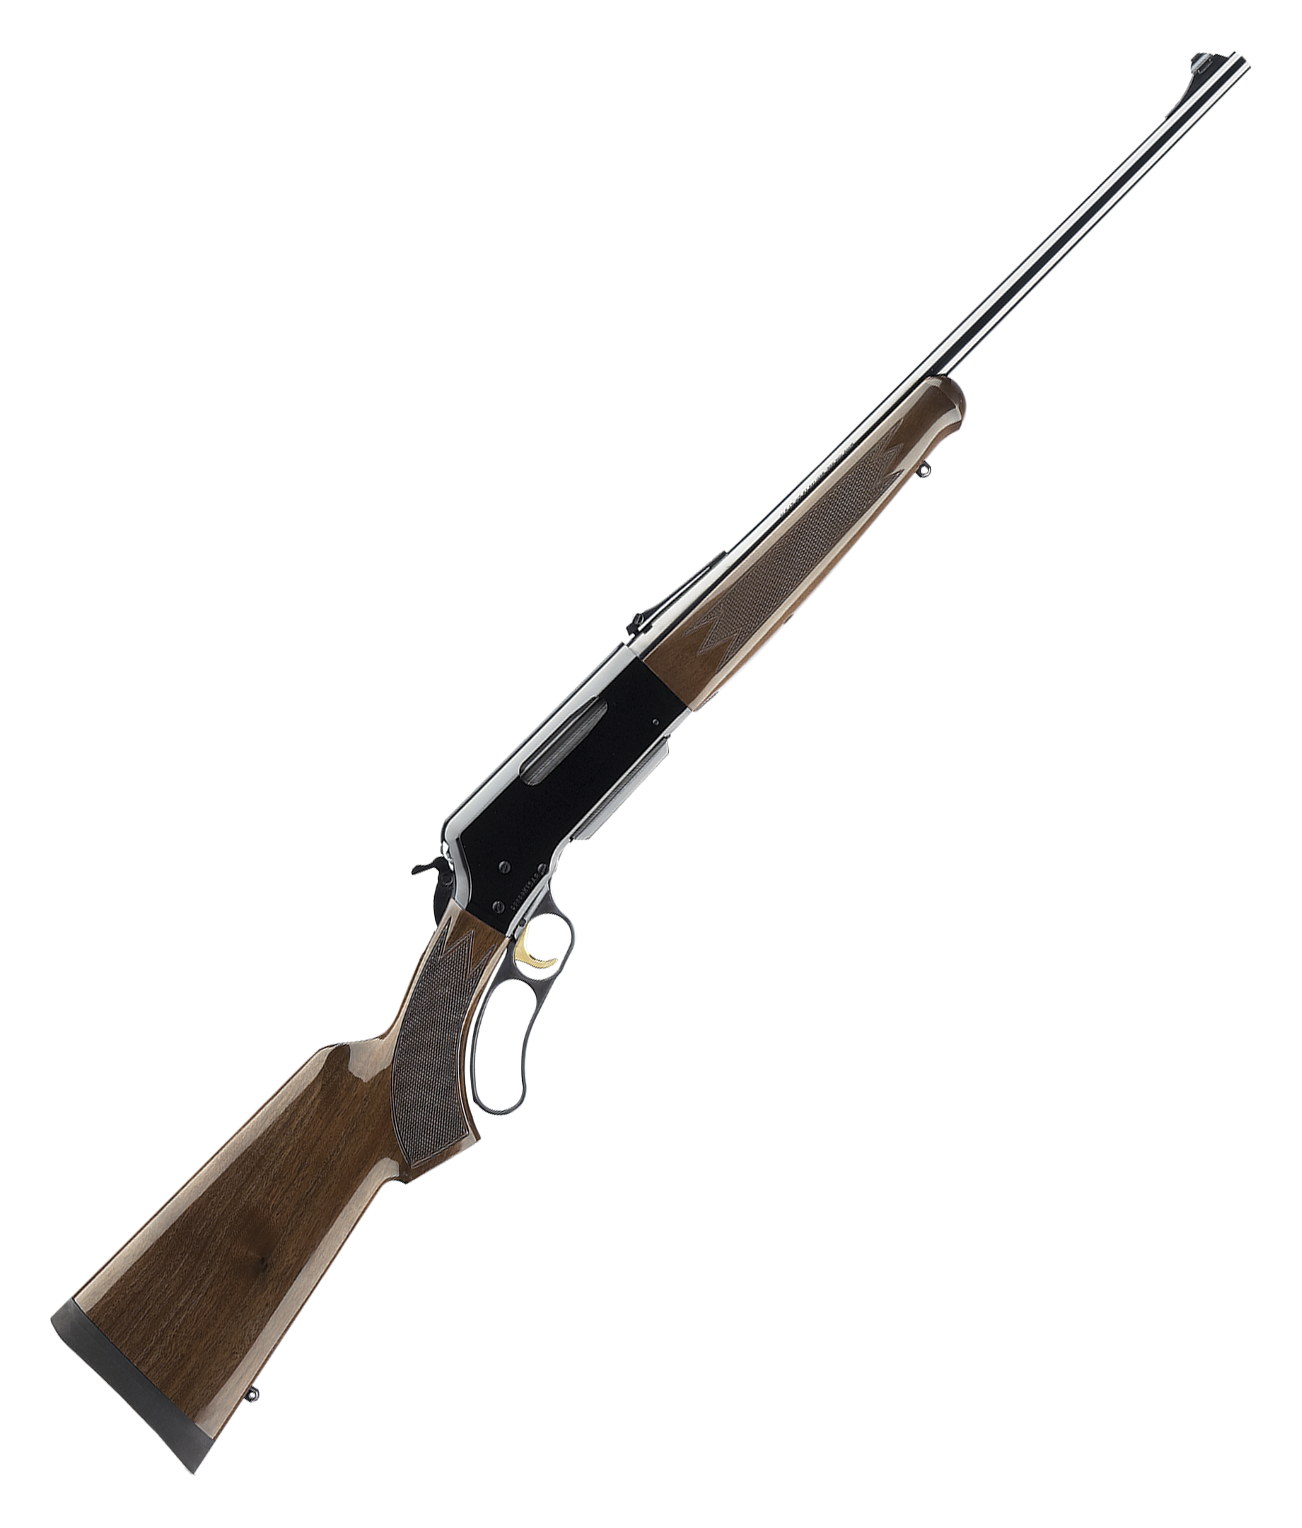 Browning BLR Lightweight Lever-Action Rifle with Pistol Grip Stock